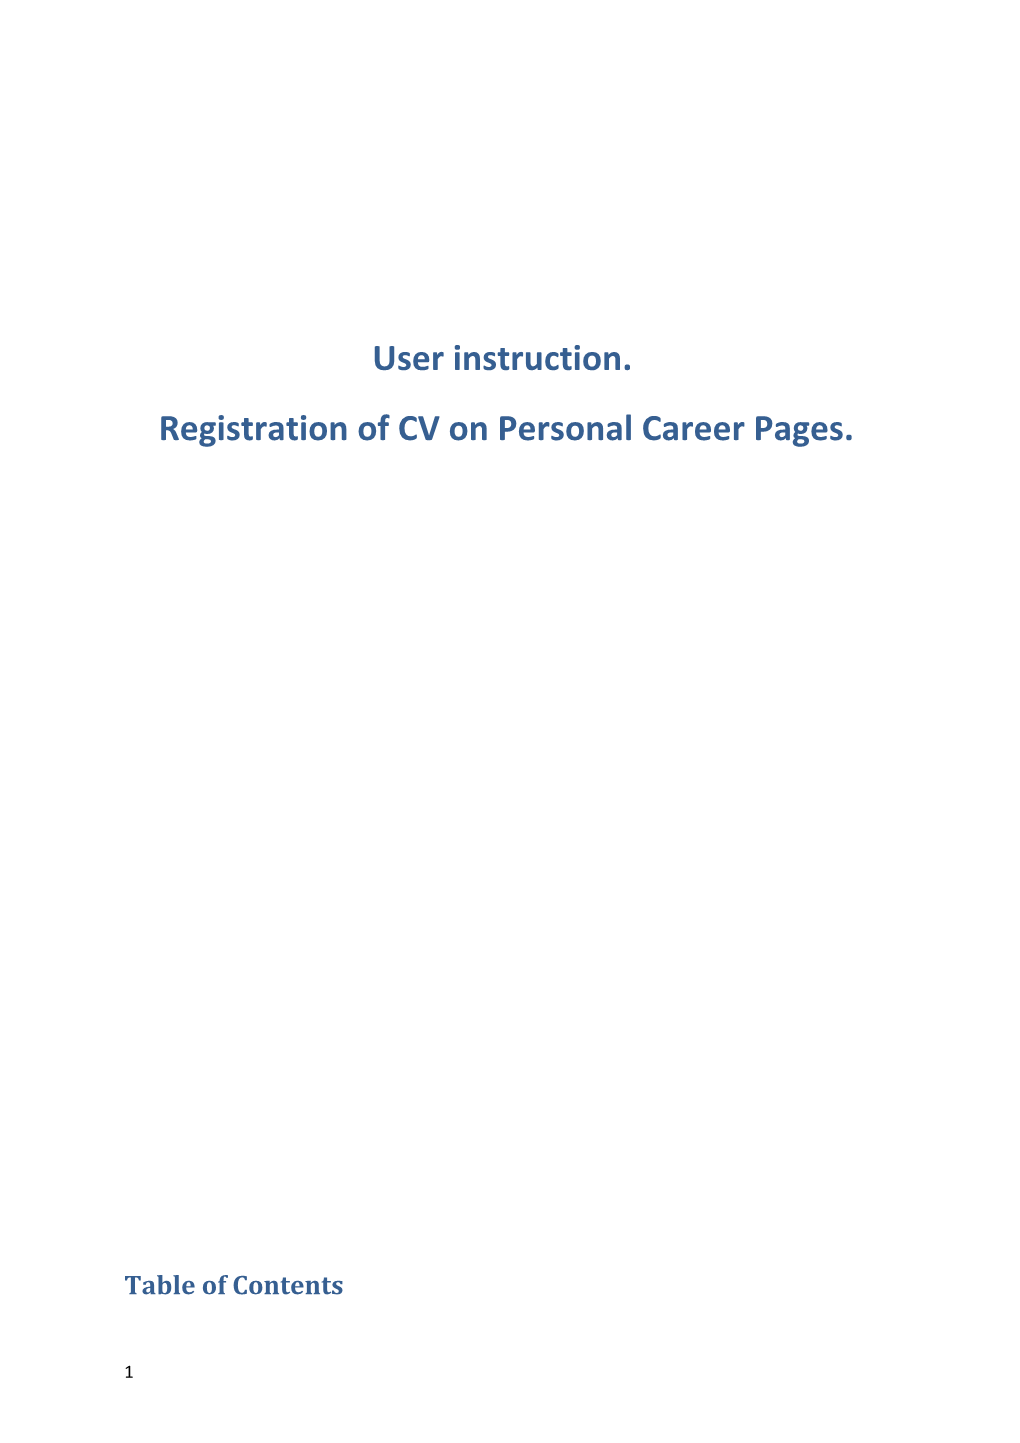 Registration of CV on Personal Career Pages